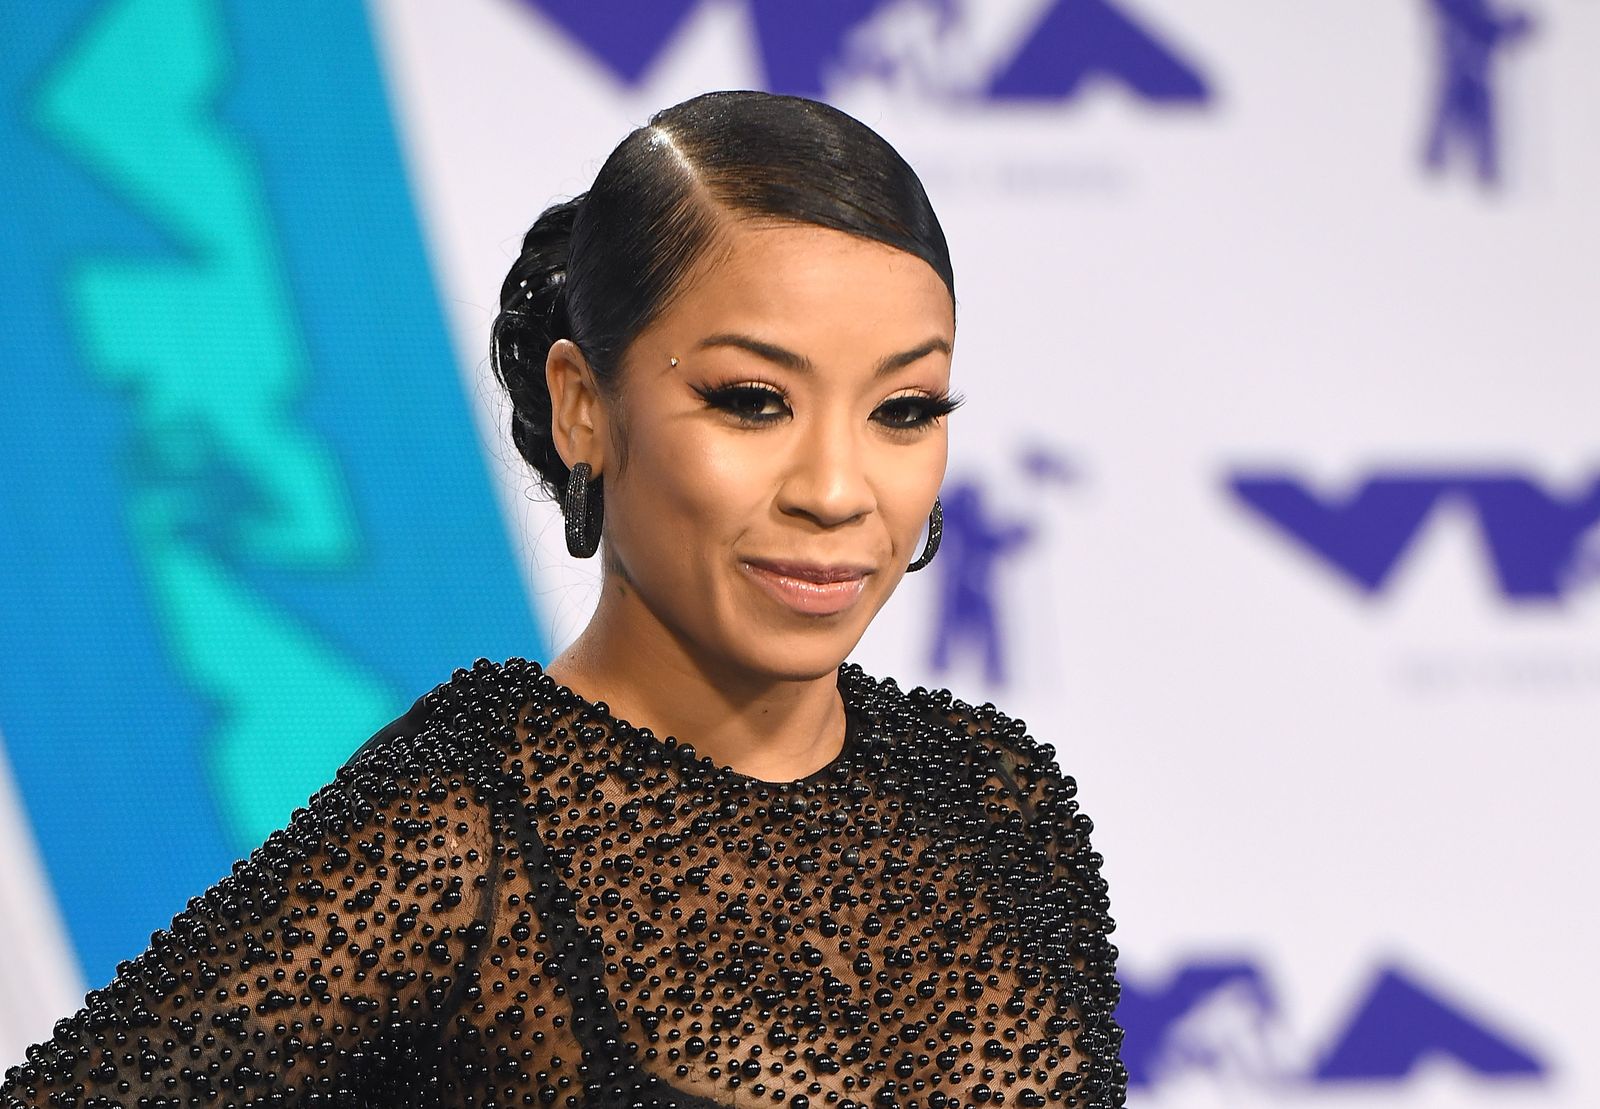 Keyshia Cole at the 2017 MTV Video Music Awards at The Forum on August 27, 2017 | Photo: Getty Images